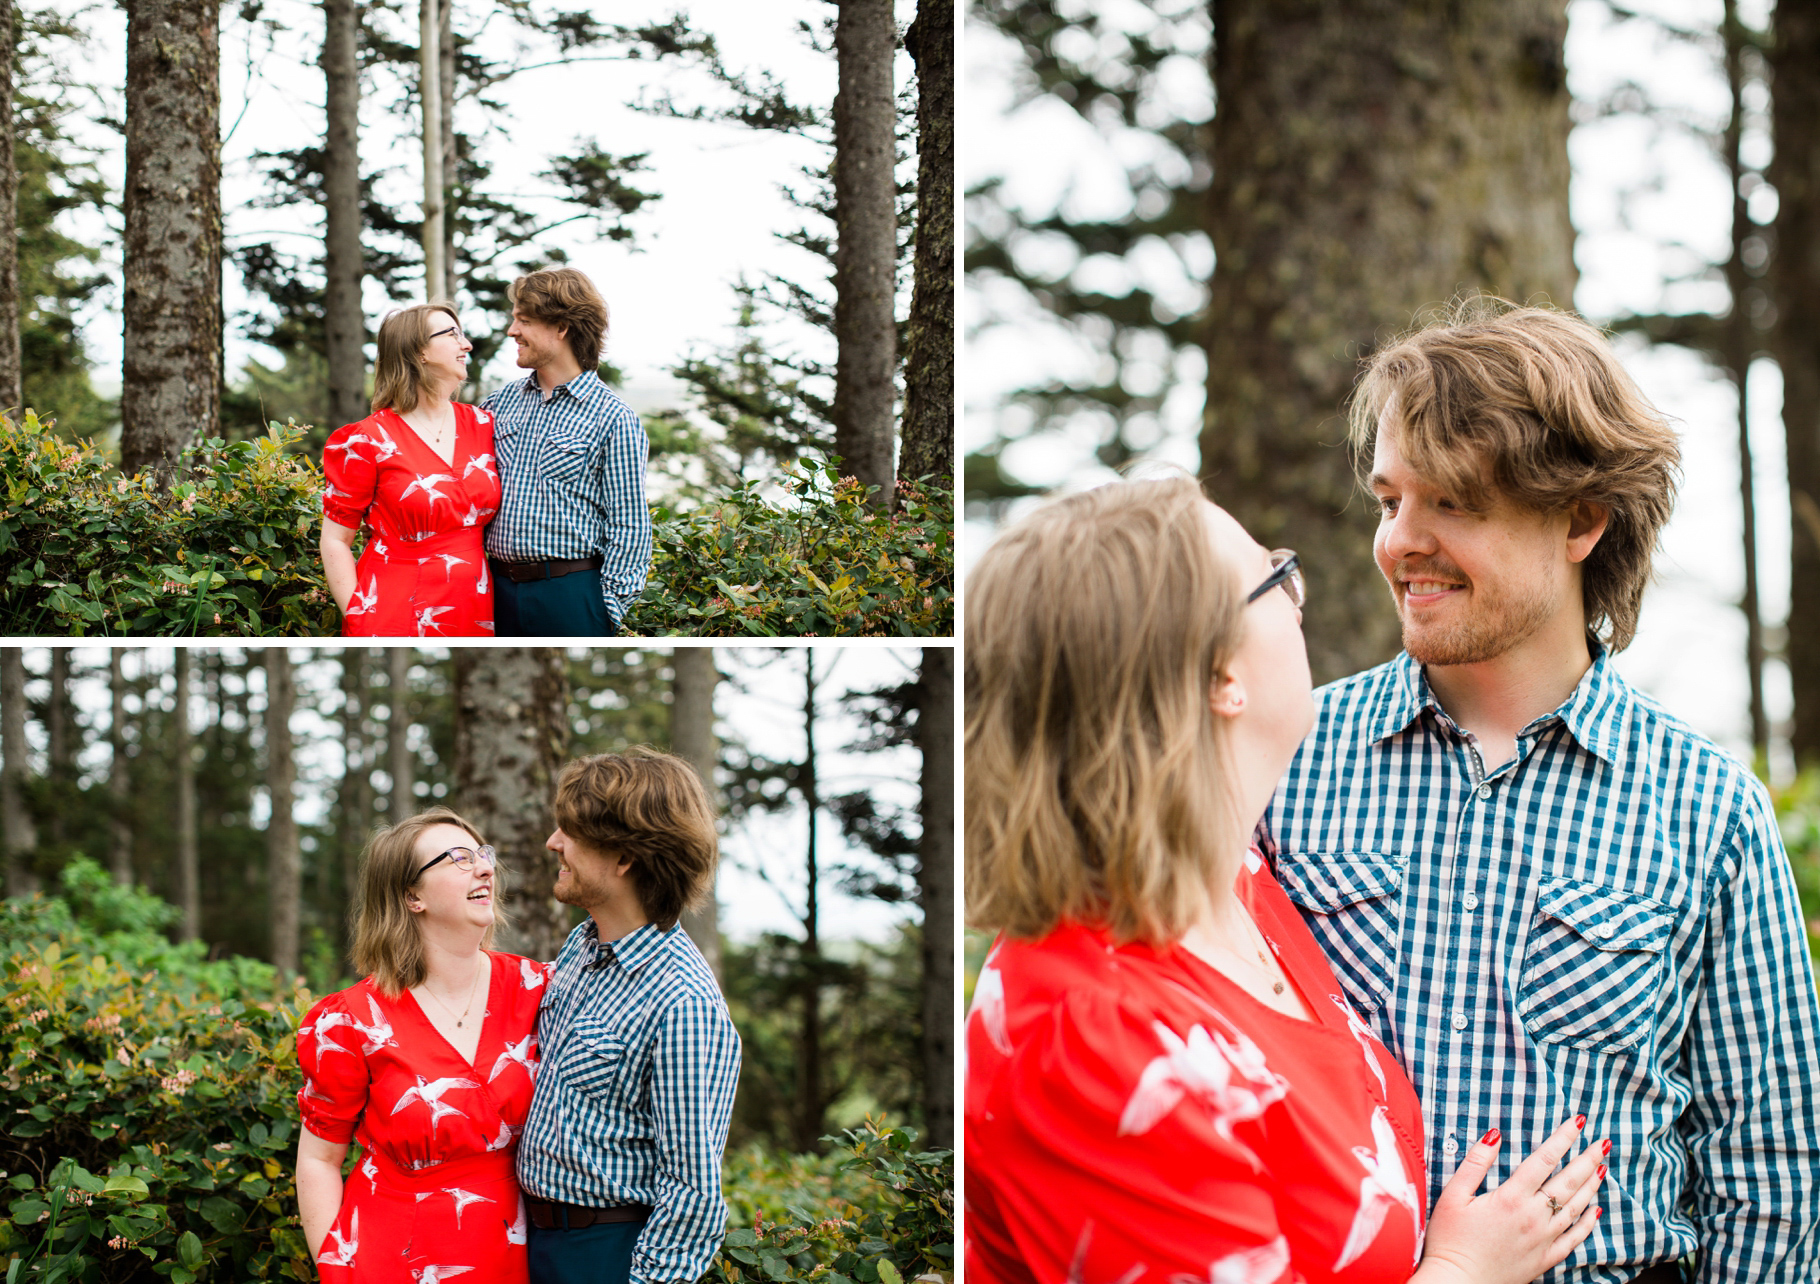 7-Ilwaco-Cape-Dissapointment-State-Park-Engagment-Session-Photos-North-Head-Lighthouse-Wedding-Photographer-Northwest-Seattle-Photography